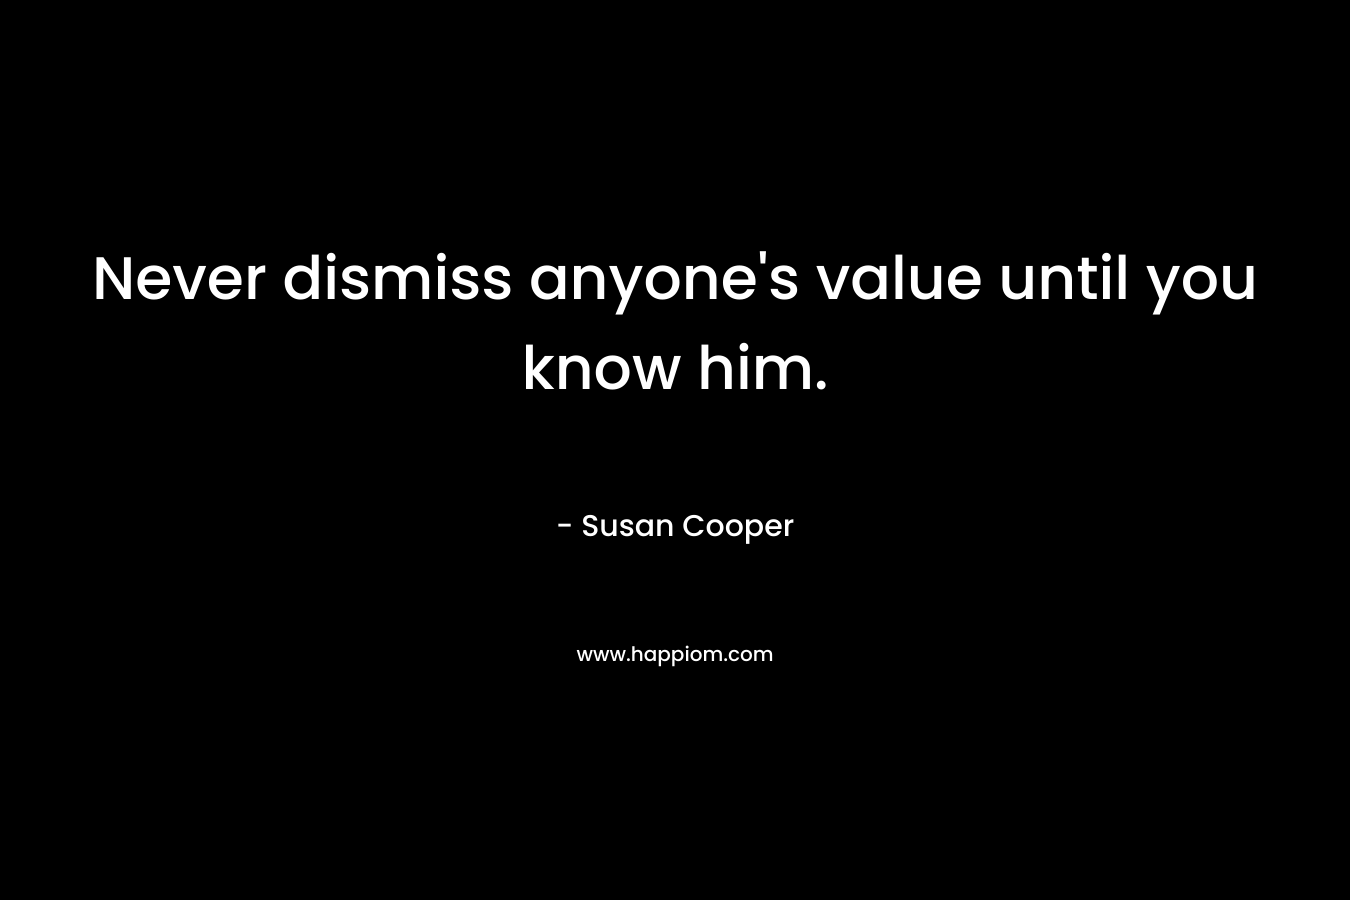 Never dismiss anyone's value until you know him.